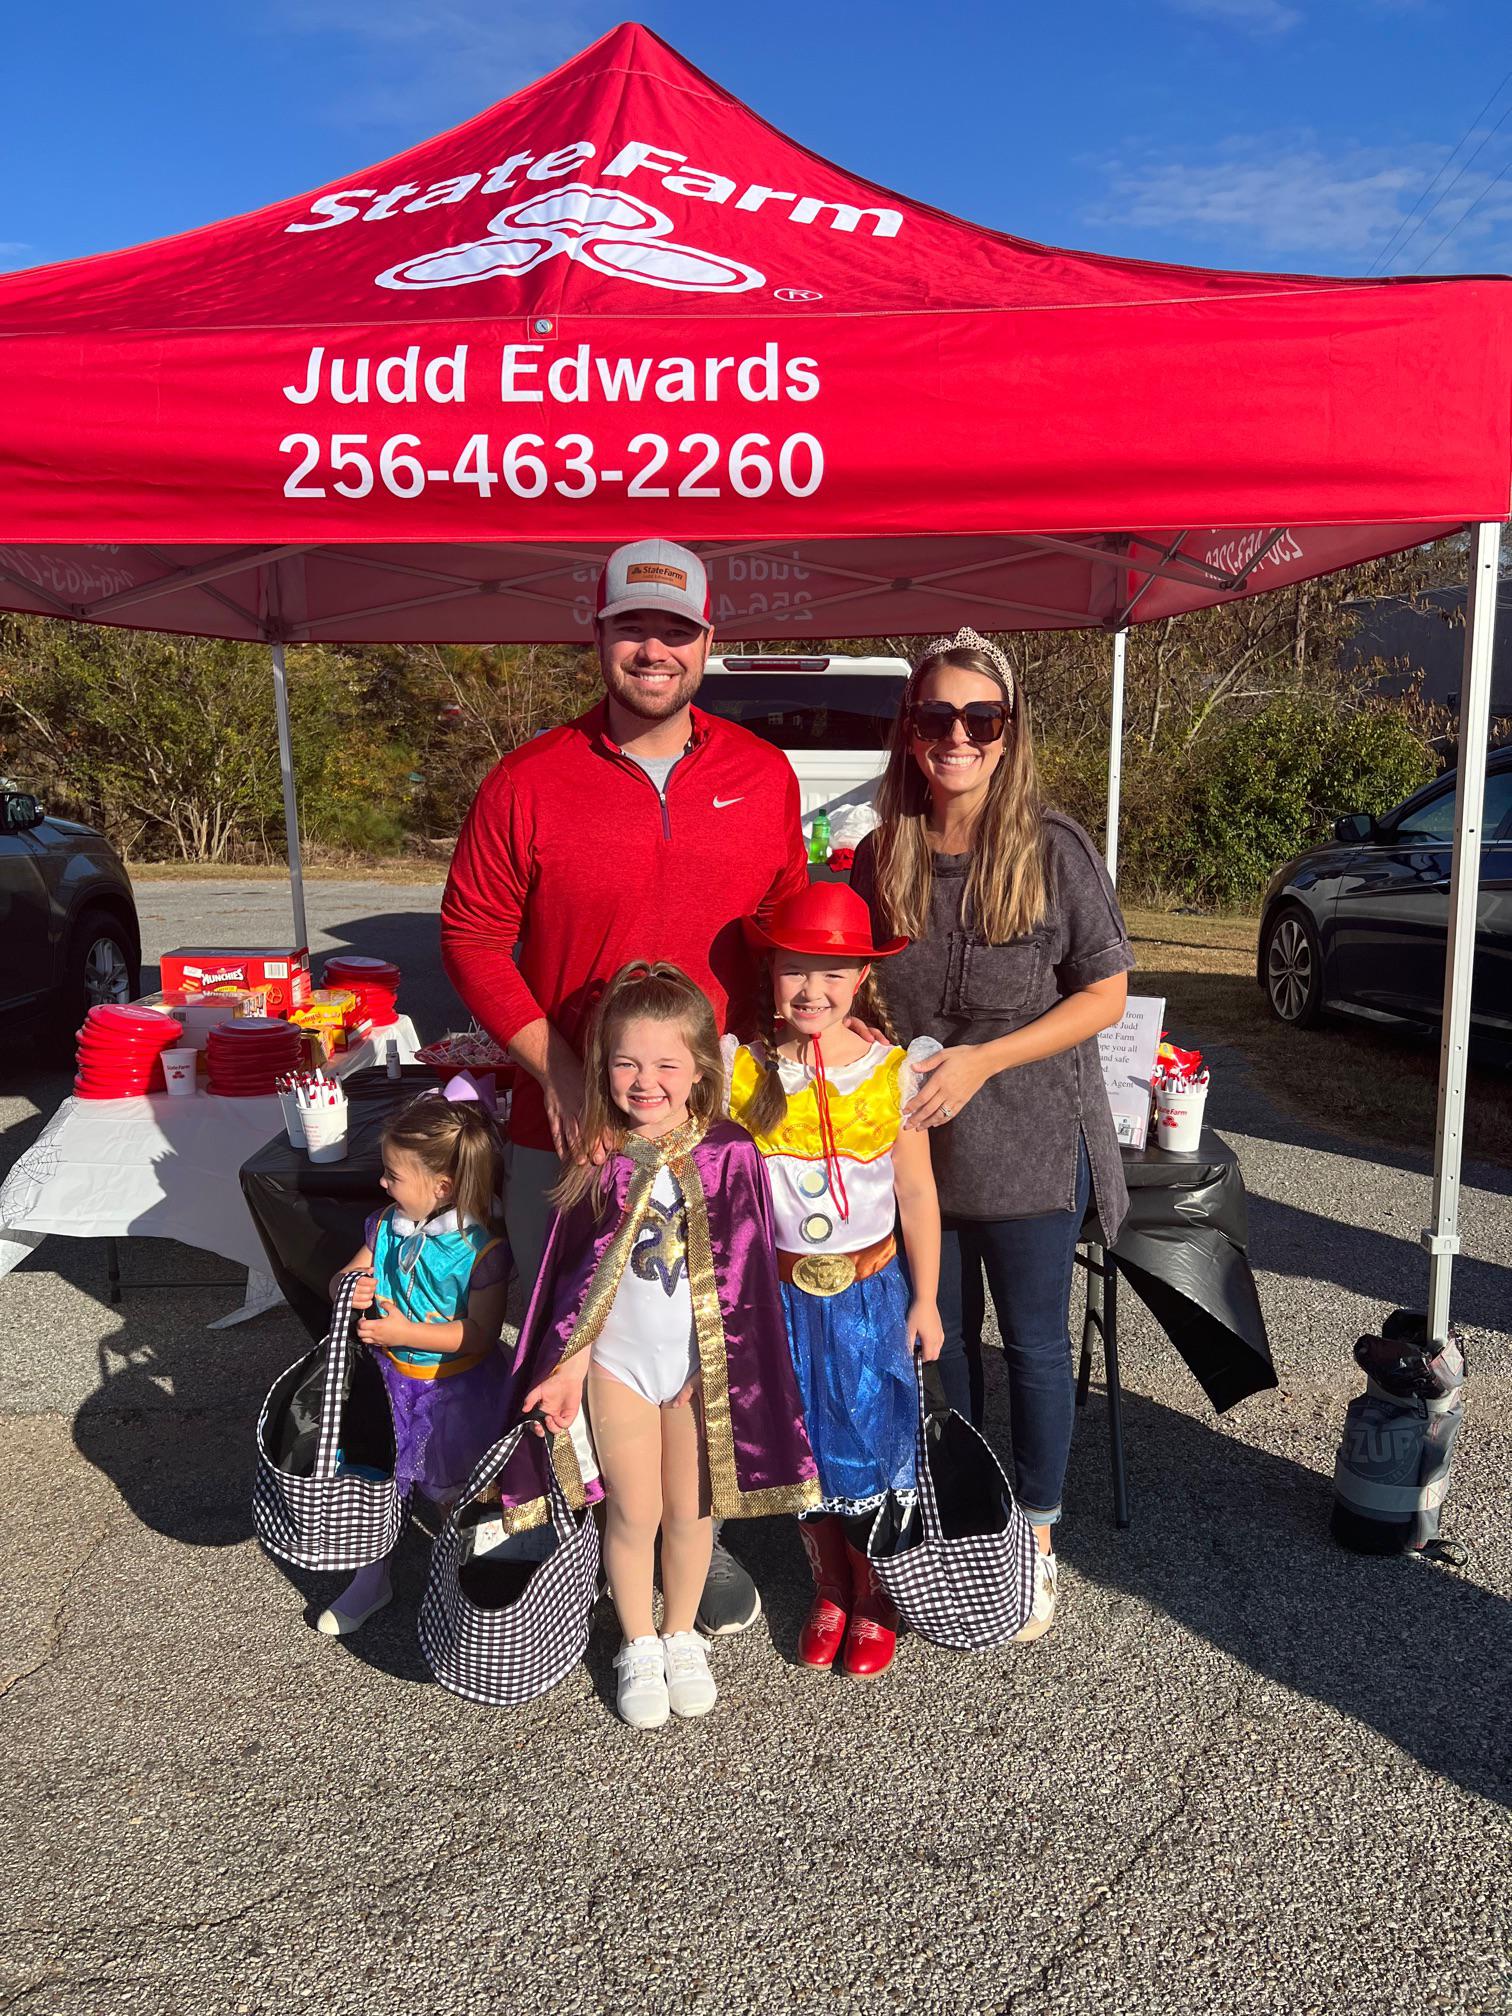 Judd Edwards State Farm insurance agent and family celebrating Halloween event